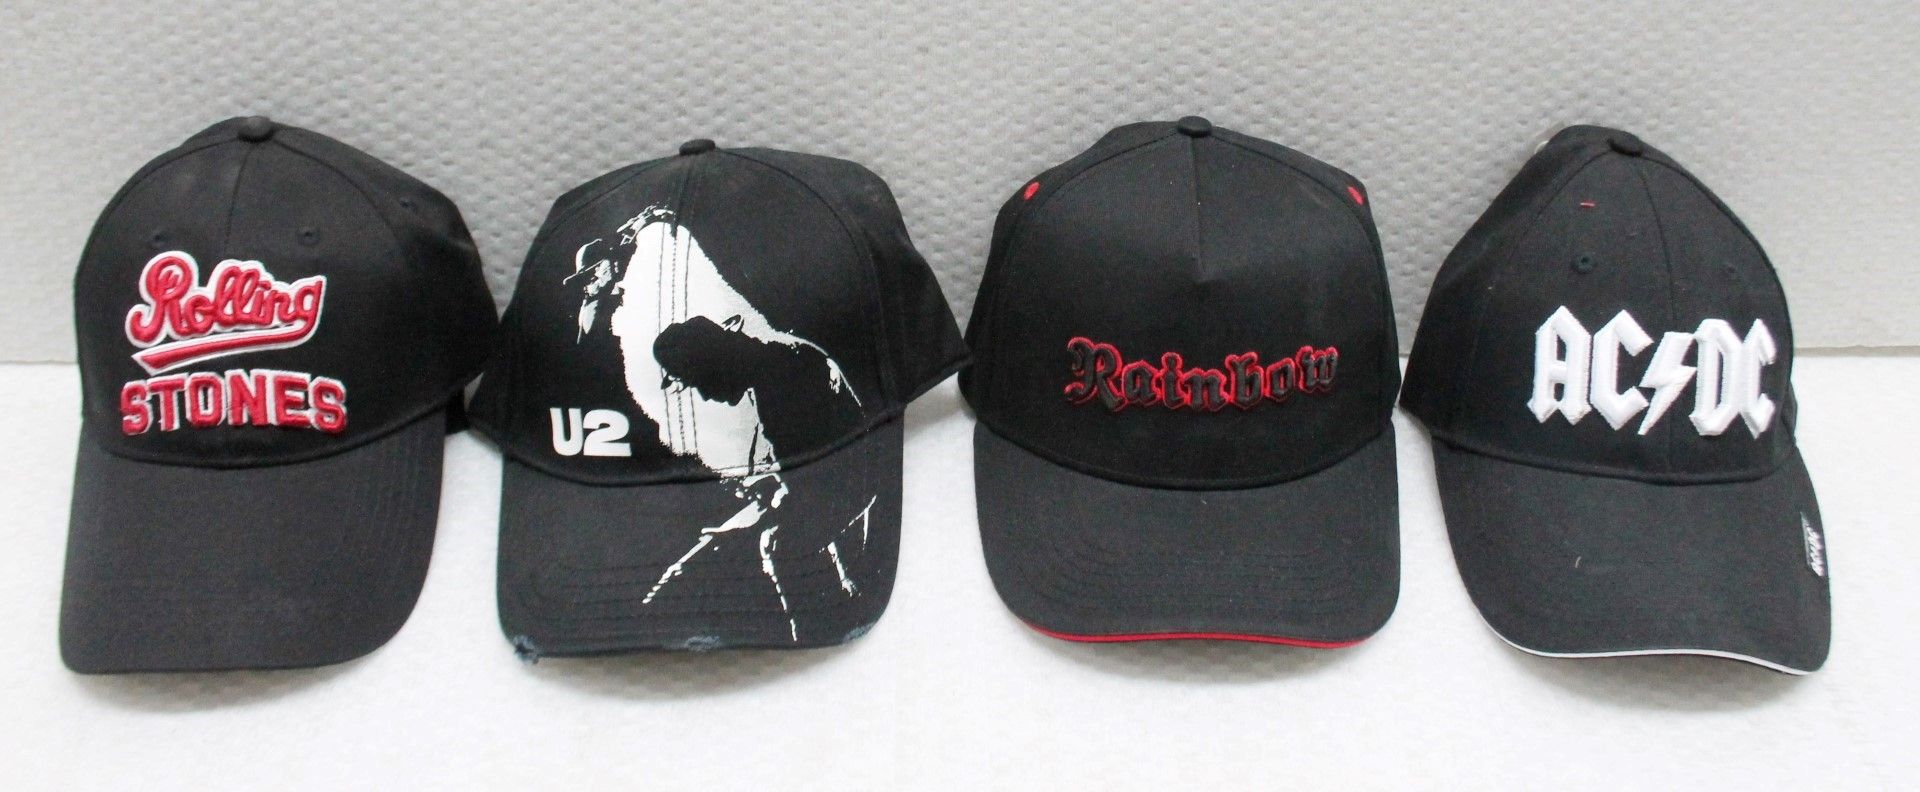 4 x Assorted Baseball Cap Featuring ACDC, Rolling Stones, Rainbow and U2 - Colour: Black - One Size - Image 5 of 6